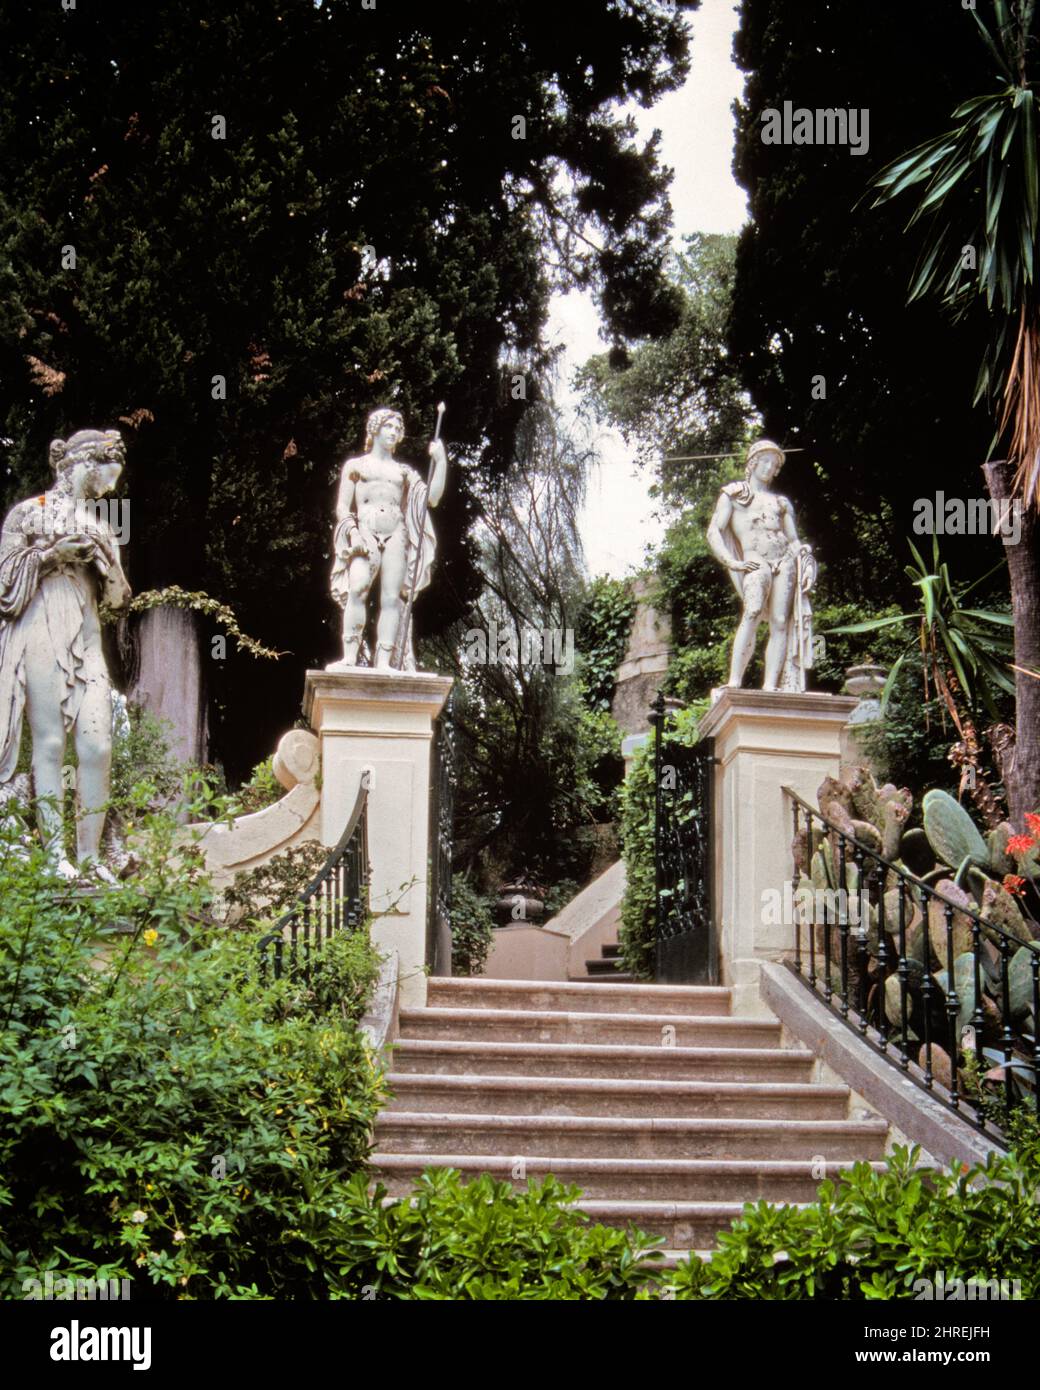 1980s GARDEN STAIRWAY AND STATUES PALACE OF ACHILLEION BUILT AS A RETREAT BY EMPRESS ELISABETH OF AUSTRIA in 1890 CORFU GREECE - kr69376 PHT001 HARS EMPRESS GARDENS IMAGINATION EDIFICE 1890 BUILT CORFU CREATIVITY MEDITERRANEAN STATUES TOURIST ATTRACTION OLD FASHIONED RETREAT Stock Photo